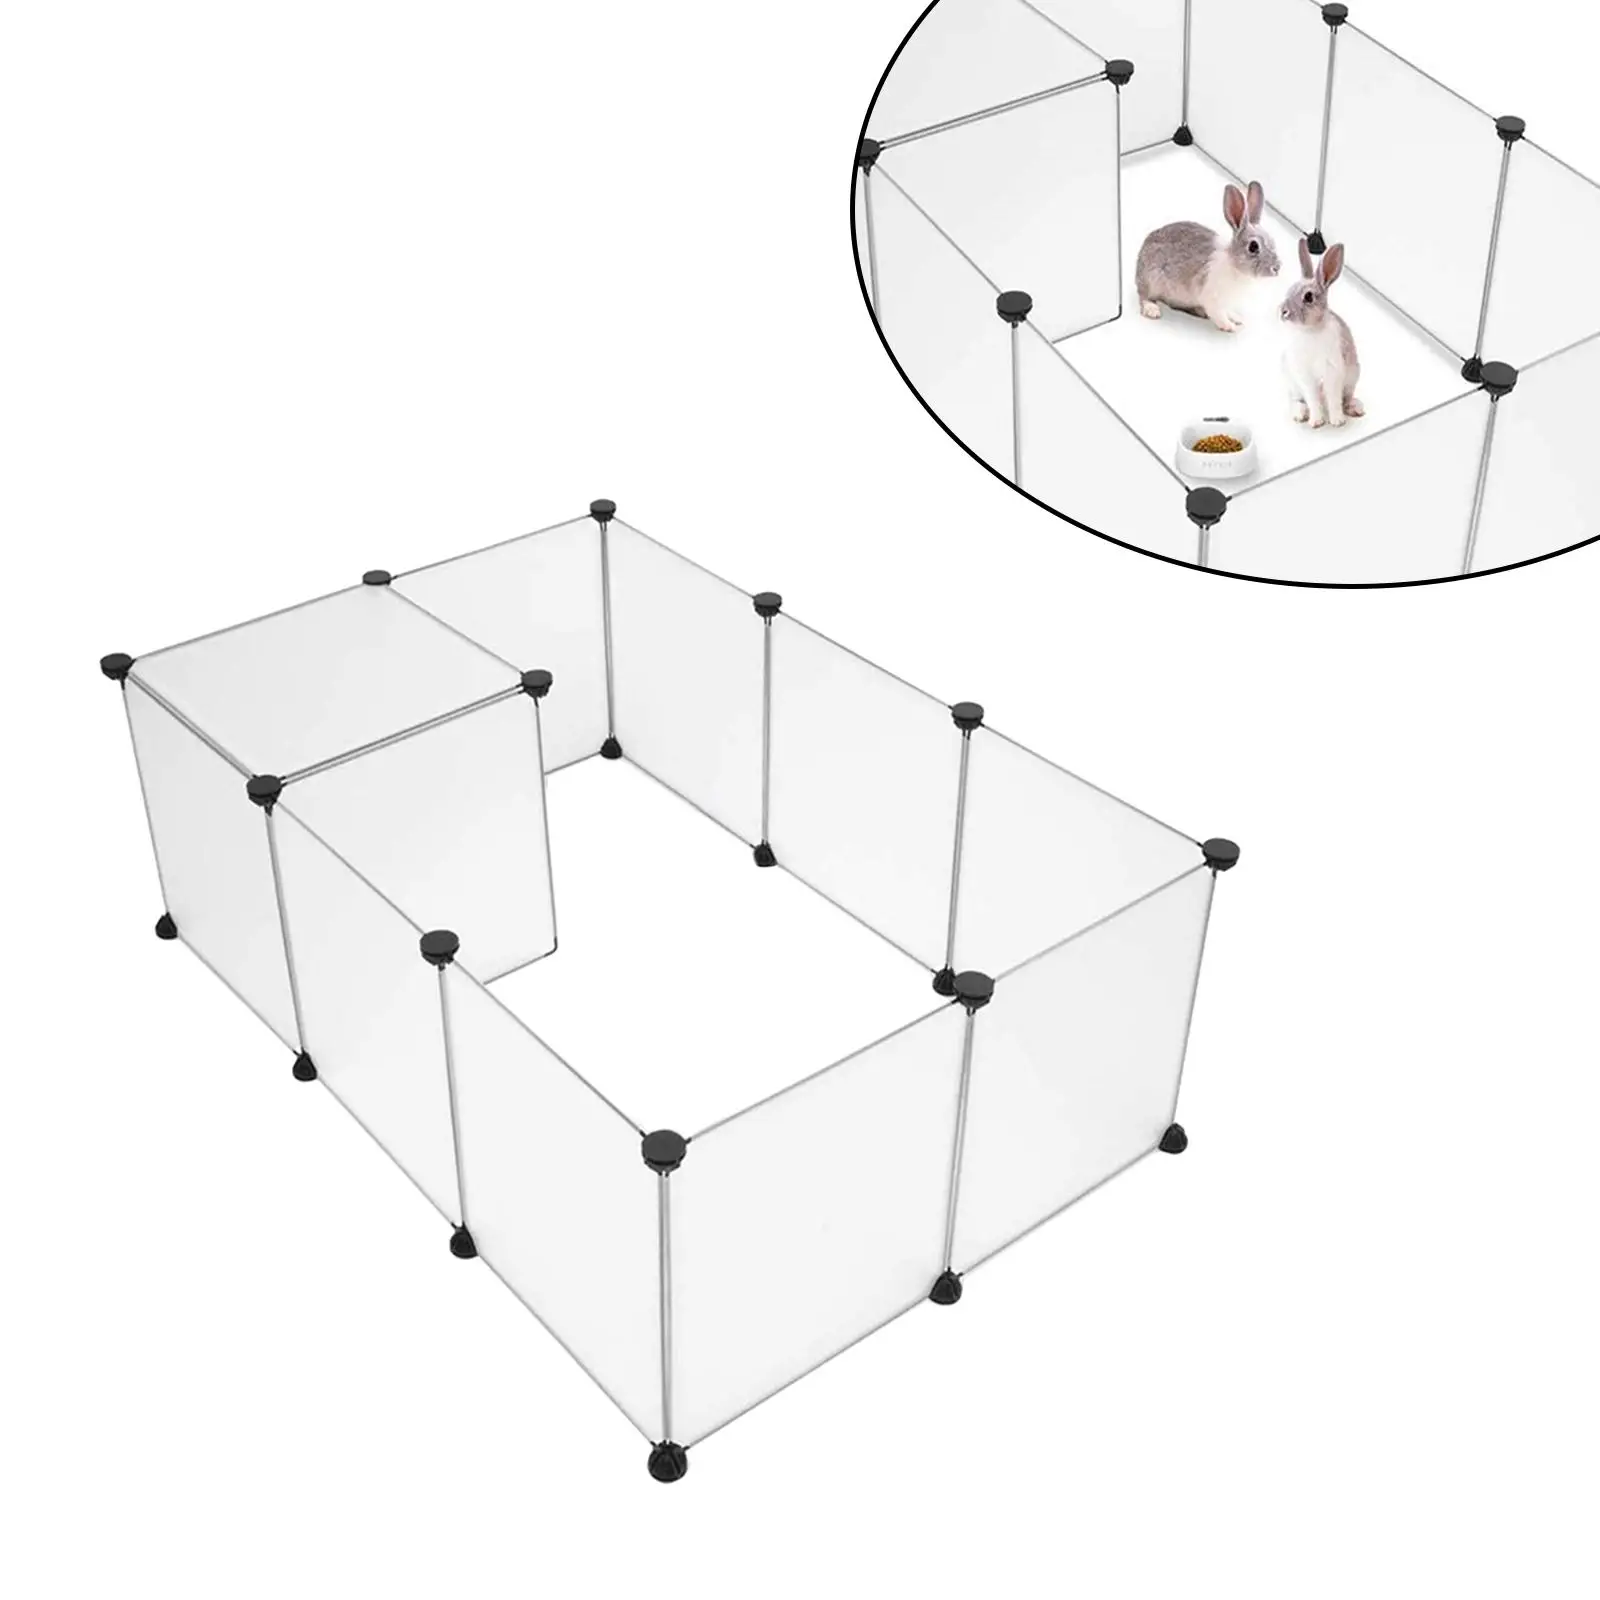 Dog Playpen Transparent Portable Sleep Playing Kennel House Dog Cage Yard Fence for Small Dogs Cats Hedgehog Bunny Hamster Rest